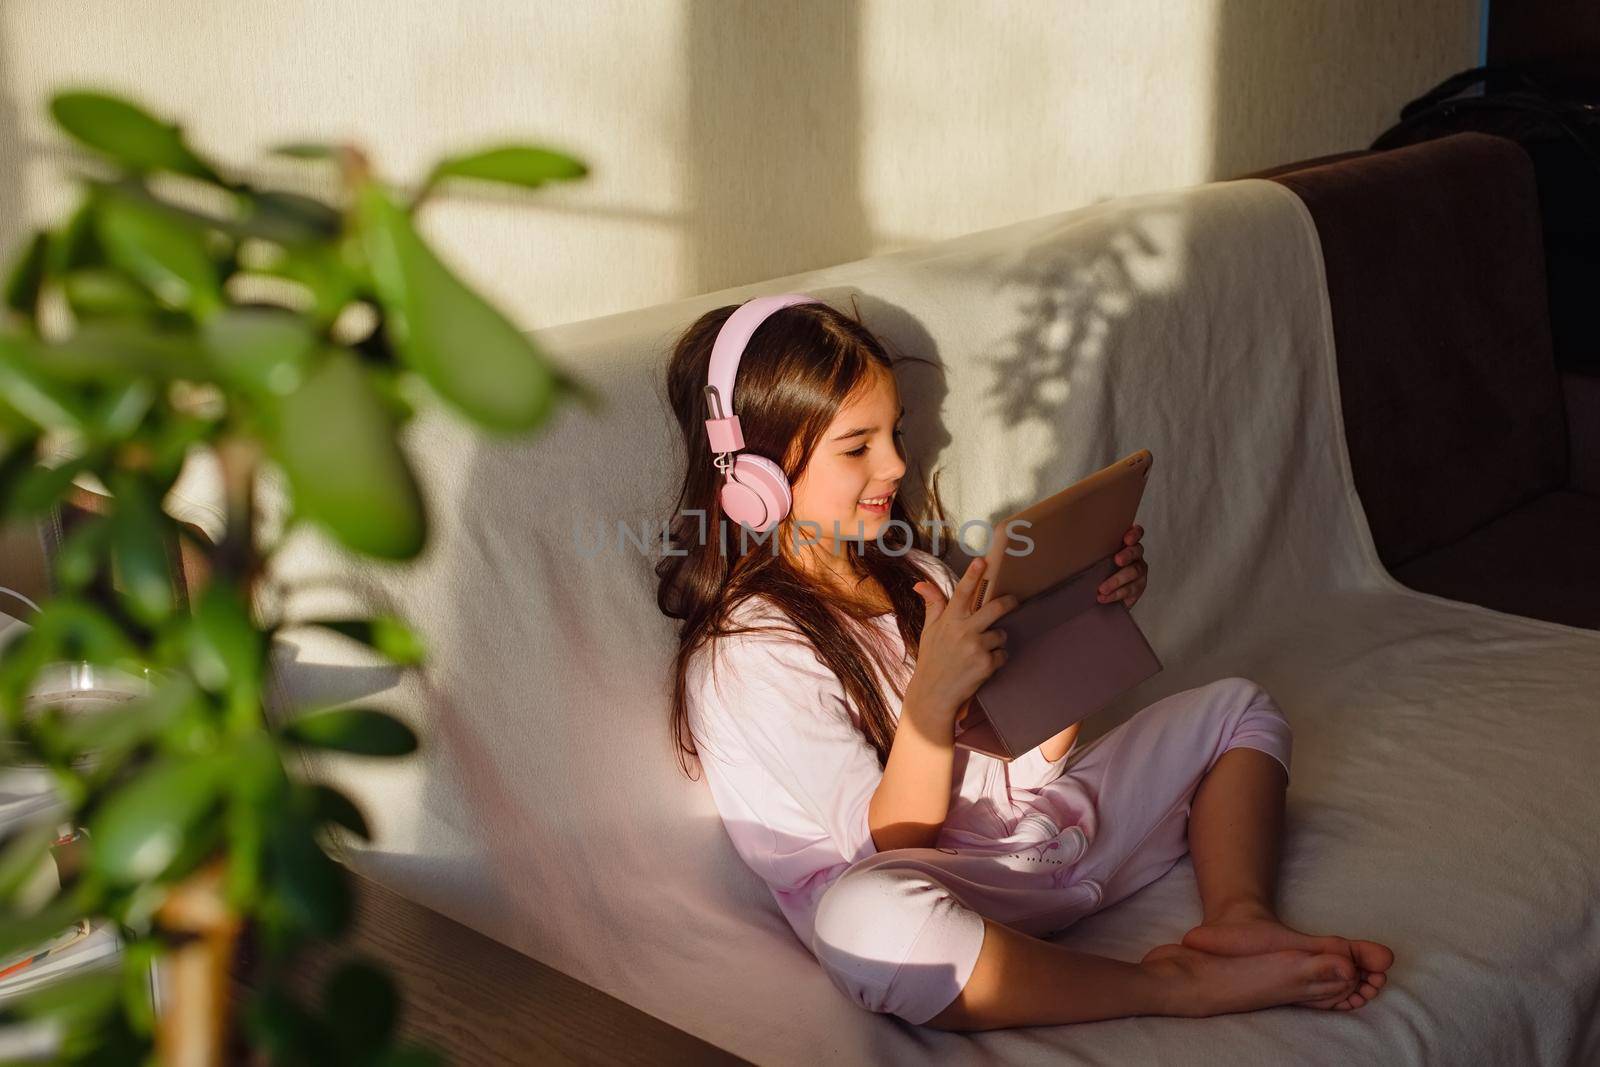 A little adorable girl in pink home clothes and pink headphones sits on the couch, looks into a digital tablet.